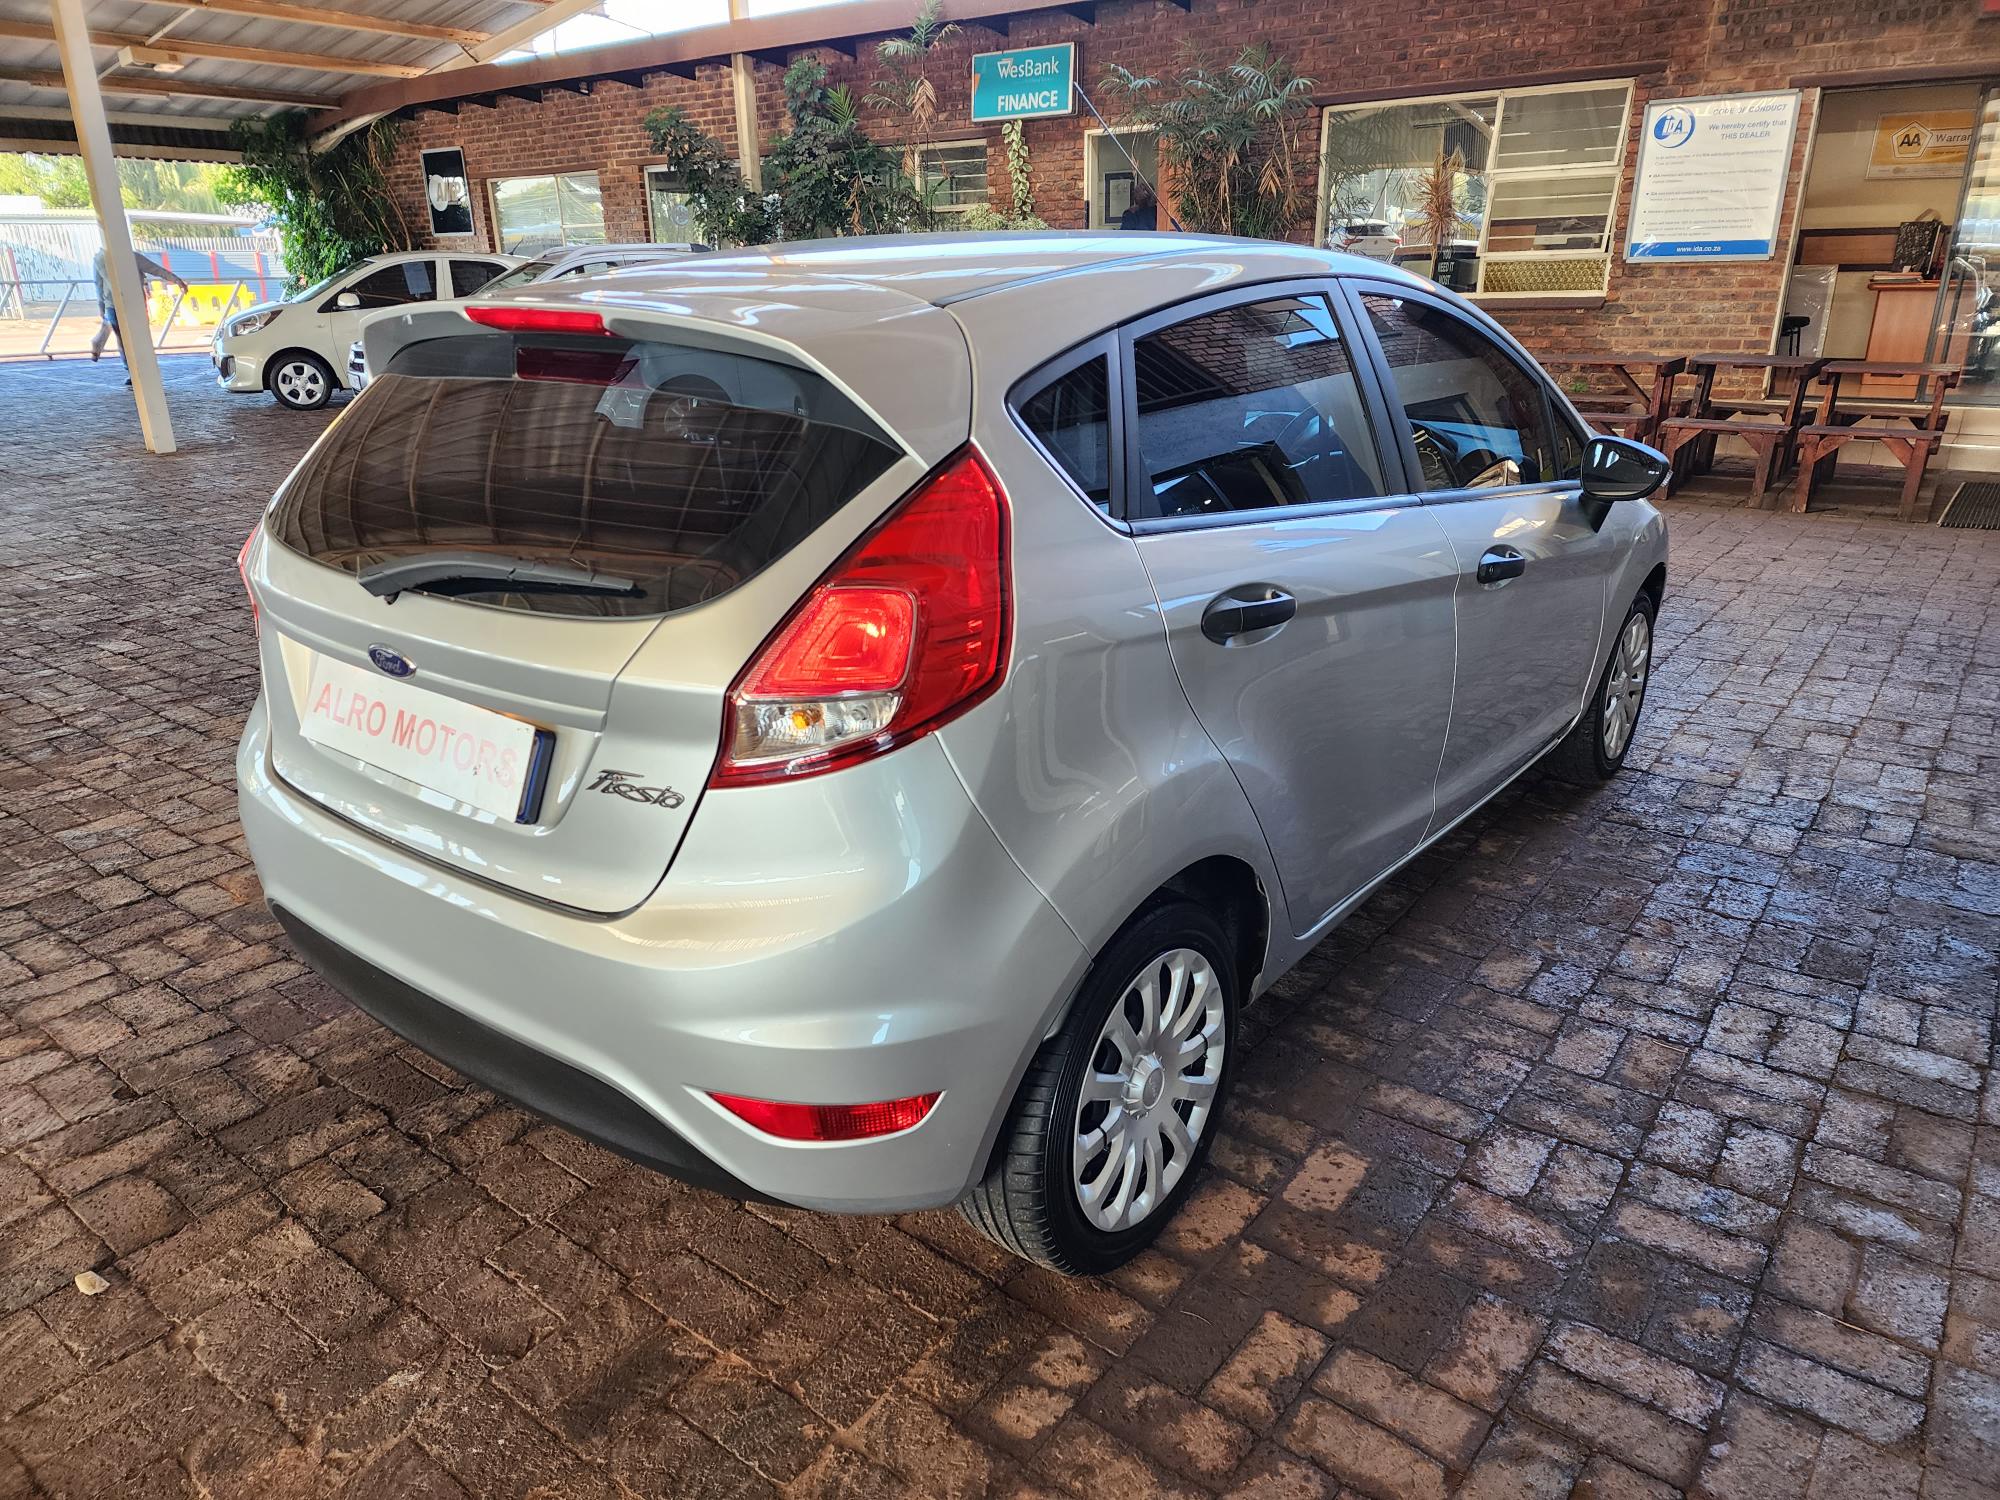 2017 FORD FIESTA 1.4 AMBIENTE 5 Dr full